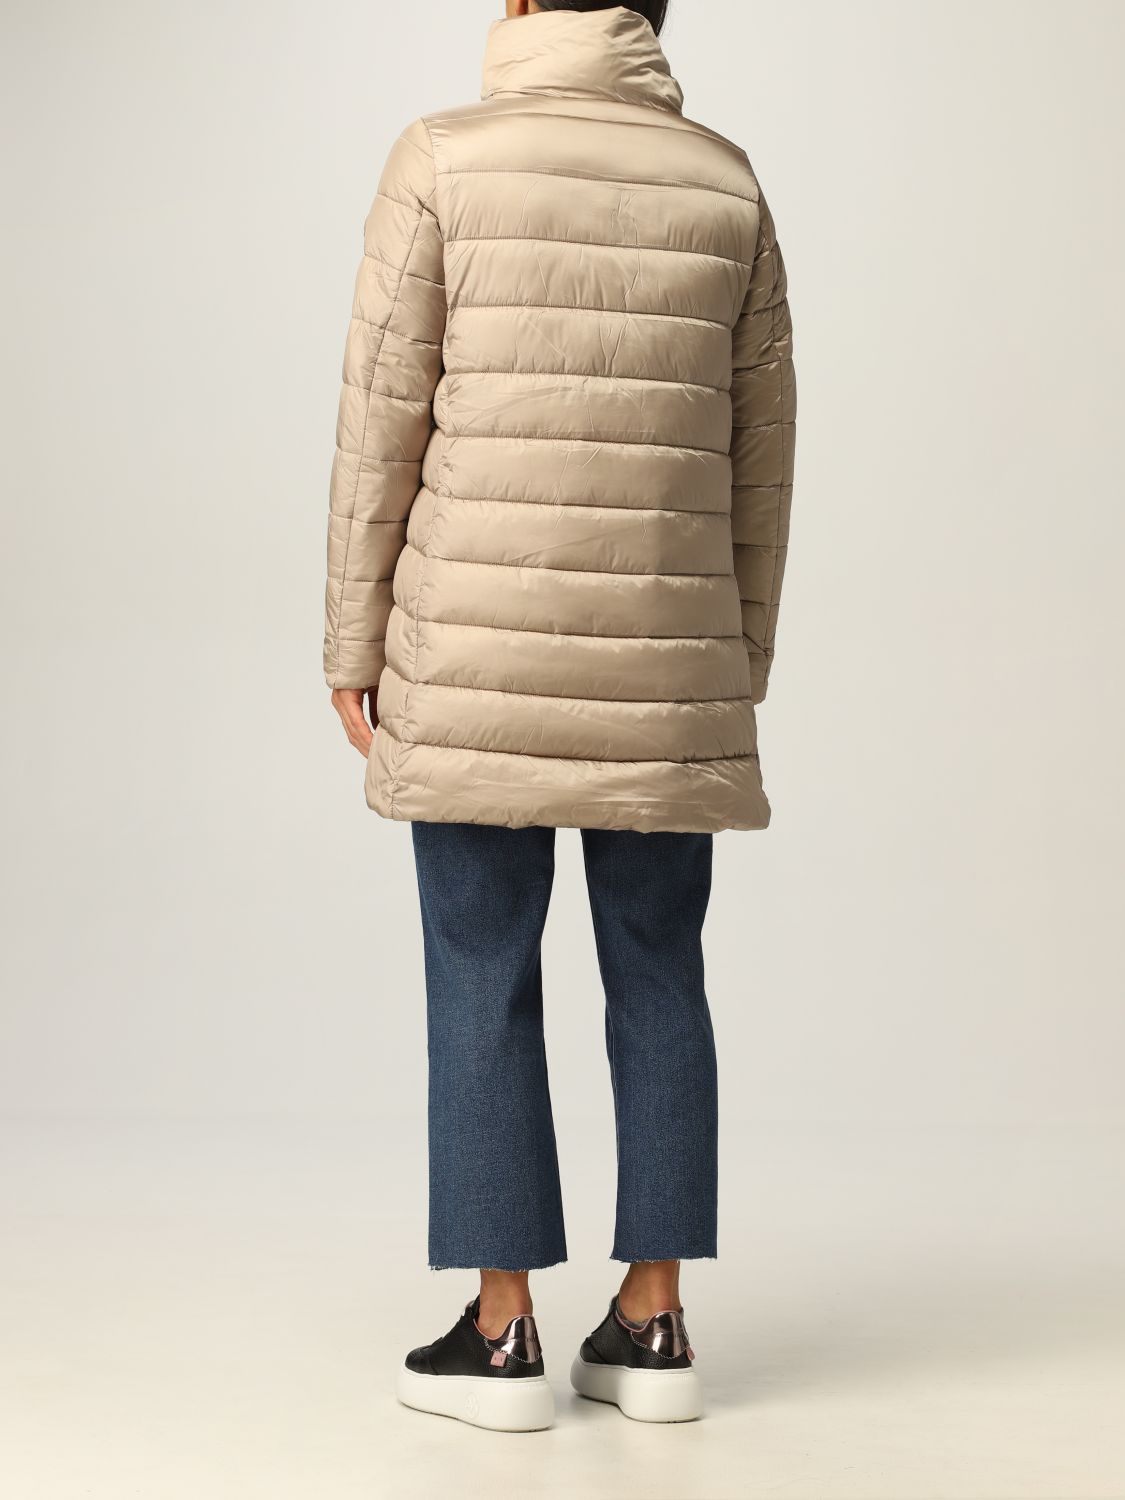 Jacket Save The Duck: Jacket women Save The Duck beige 2